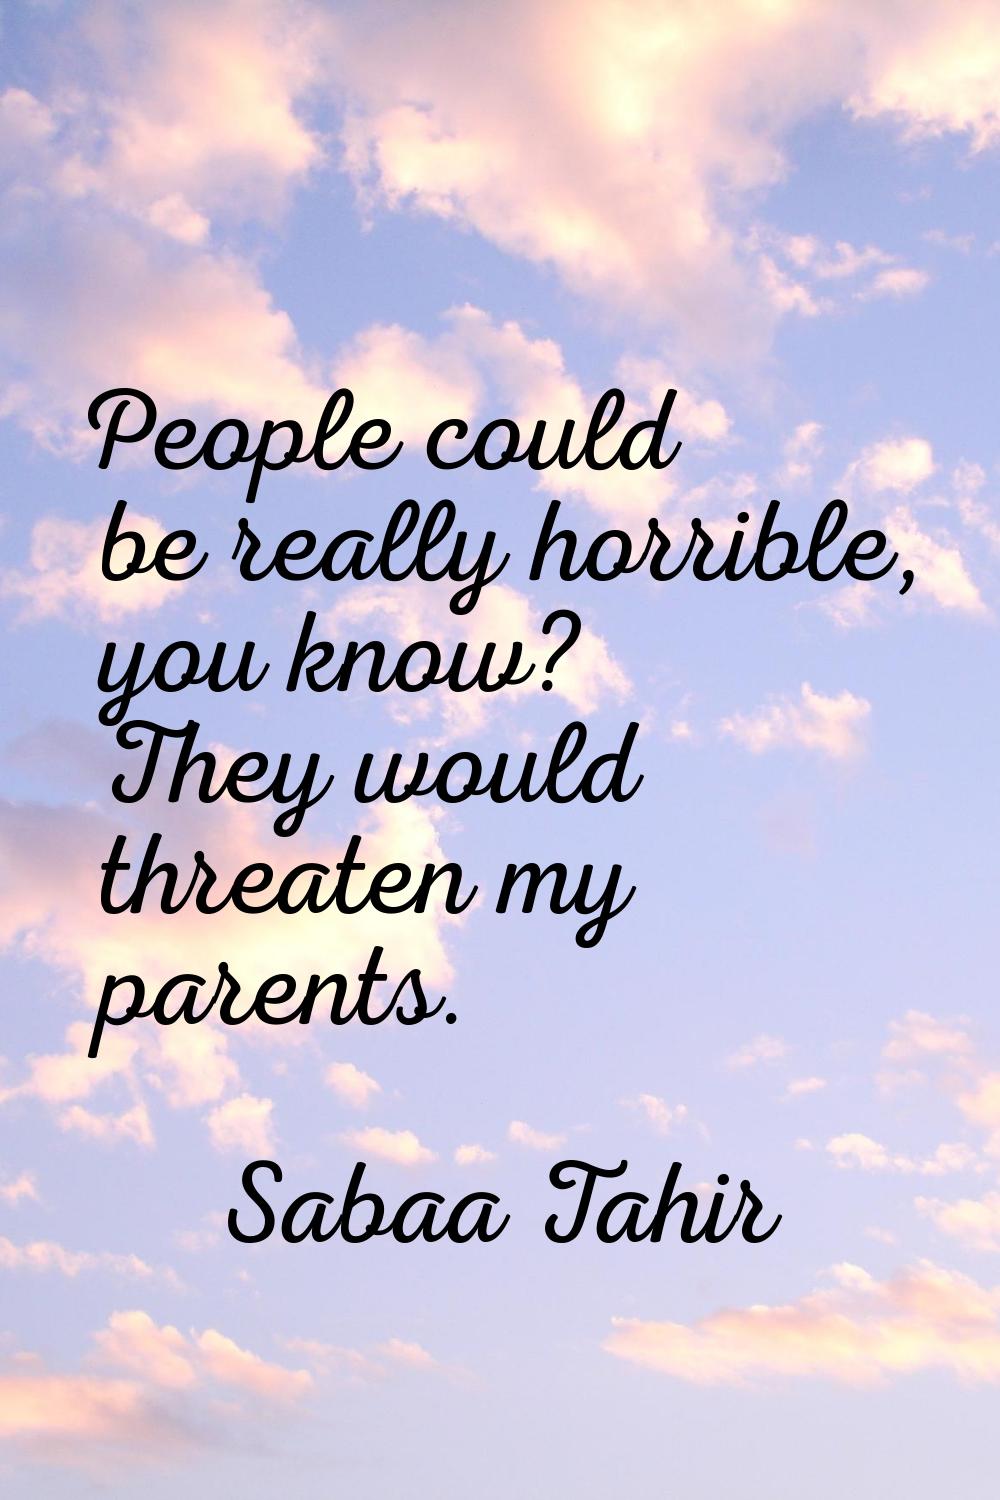 People could be really horrible, you know? They would threaten my parents.